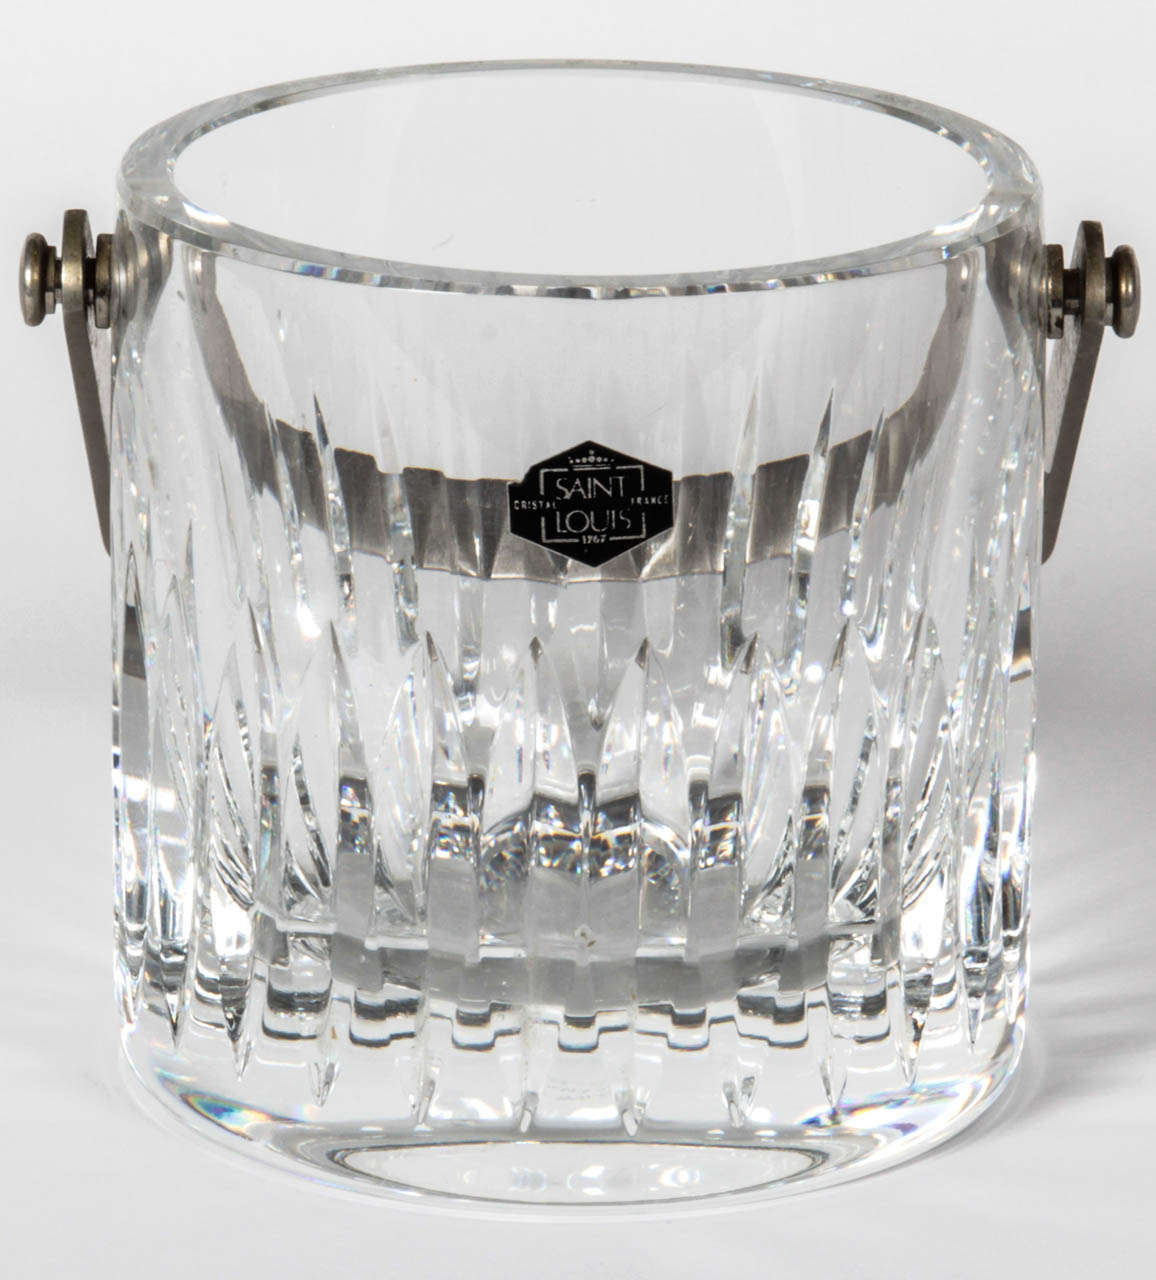 Cut lead crystal ice bucket with stainless steel handle by Saint Louis. France, circa 1970.

Dimensions: 4.75” W x 4.75” H